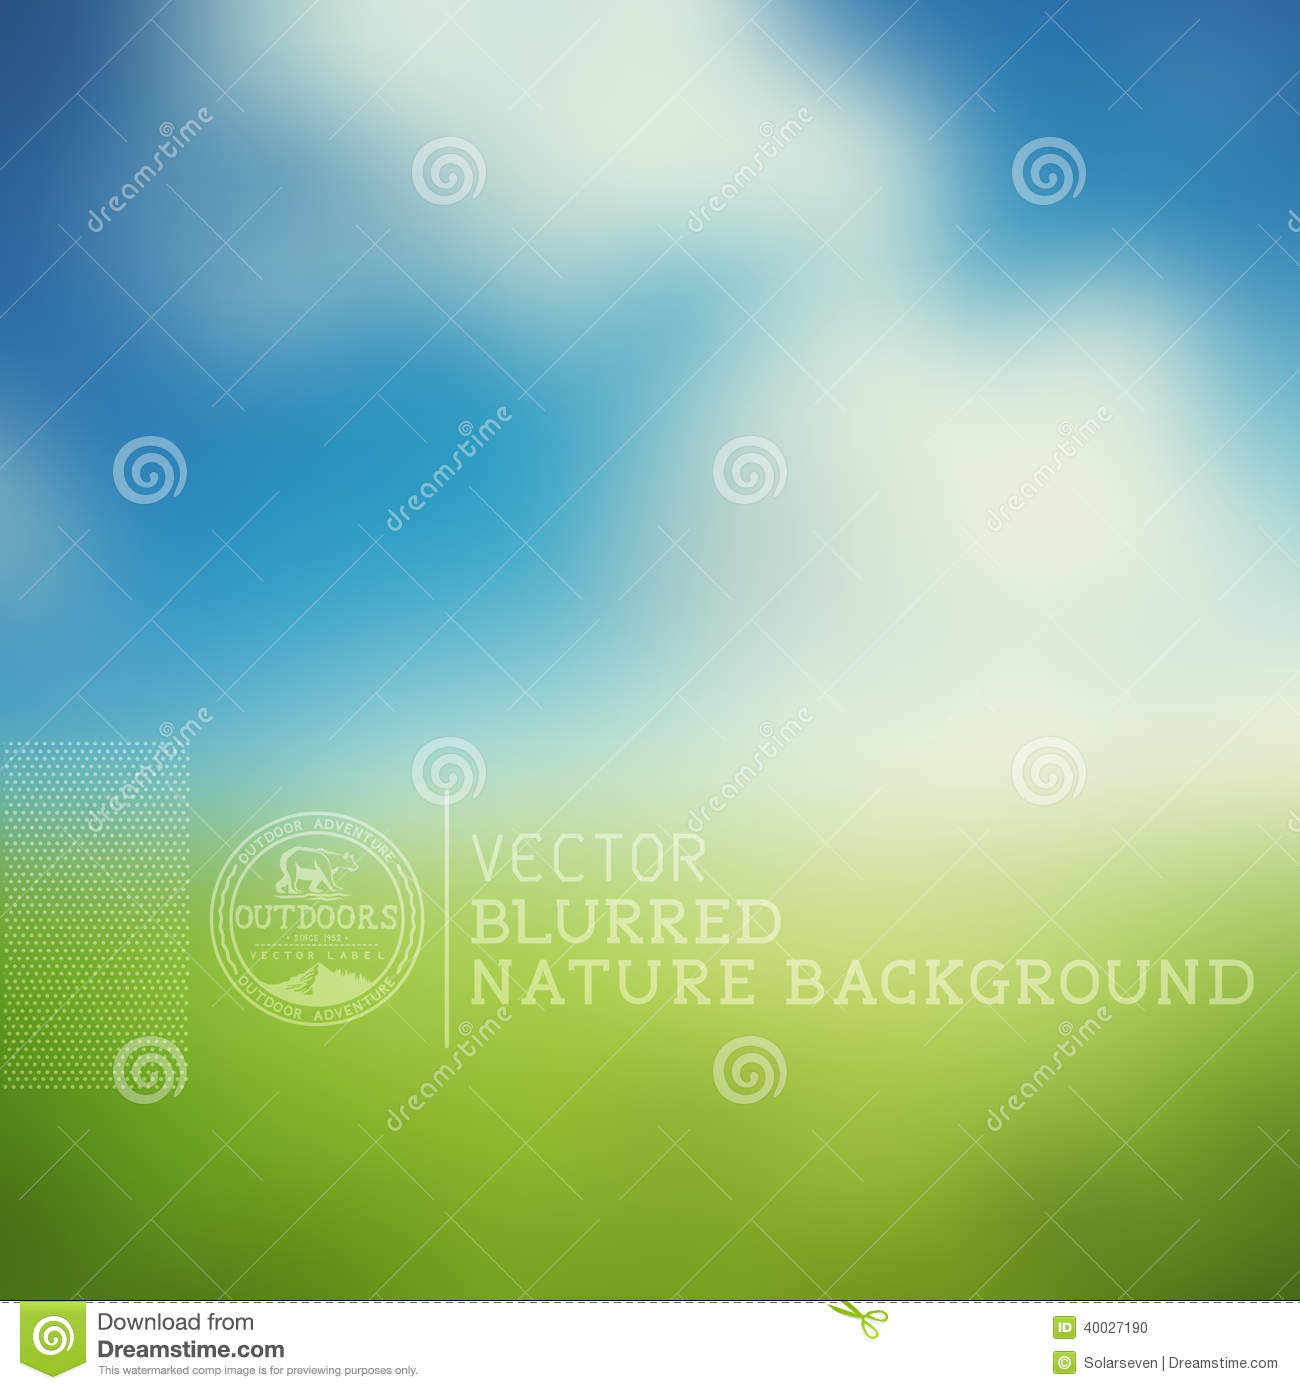 Blurred Nature Background Vector